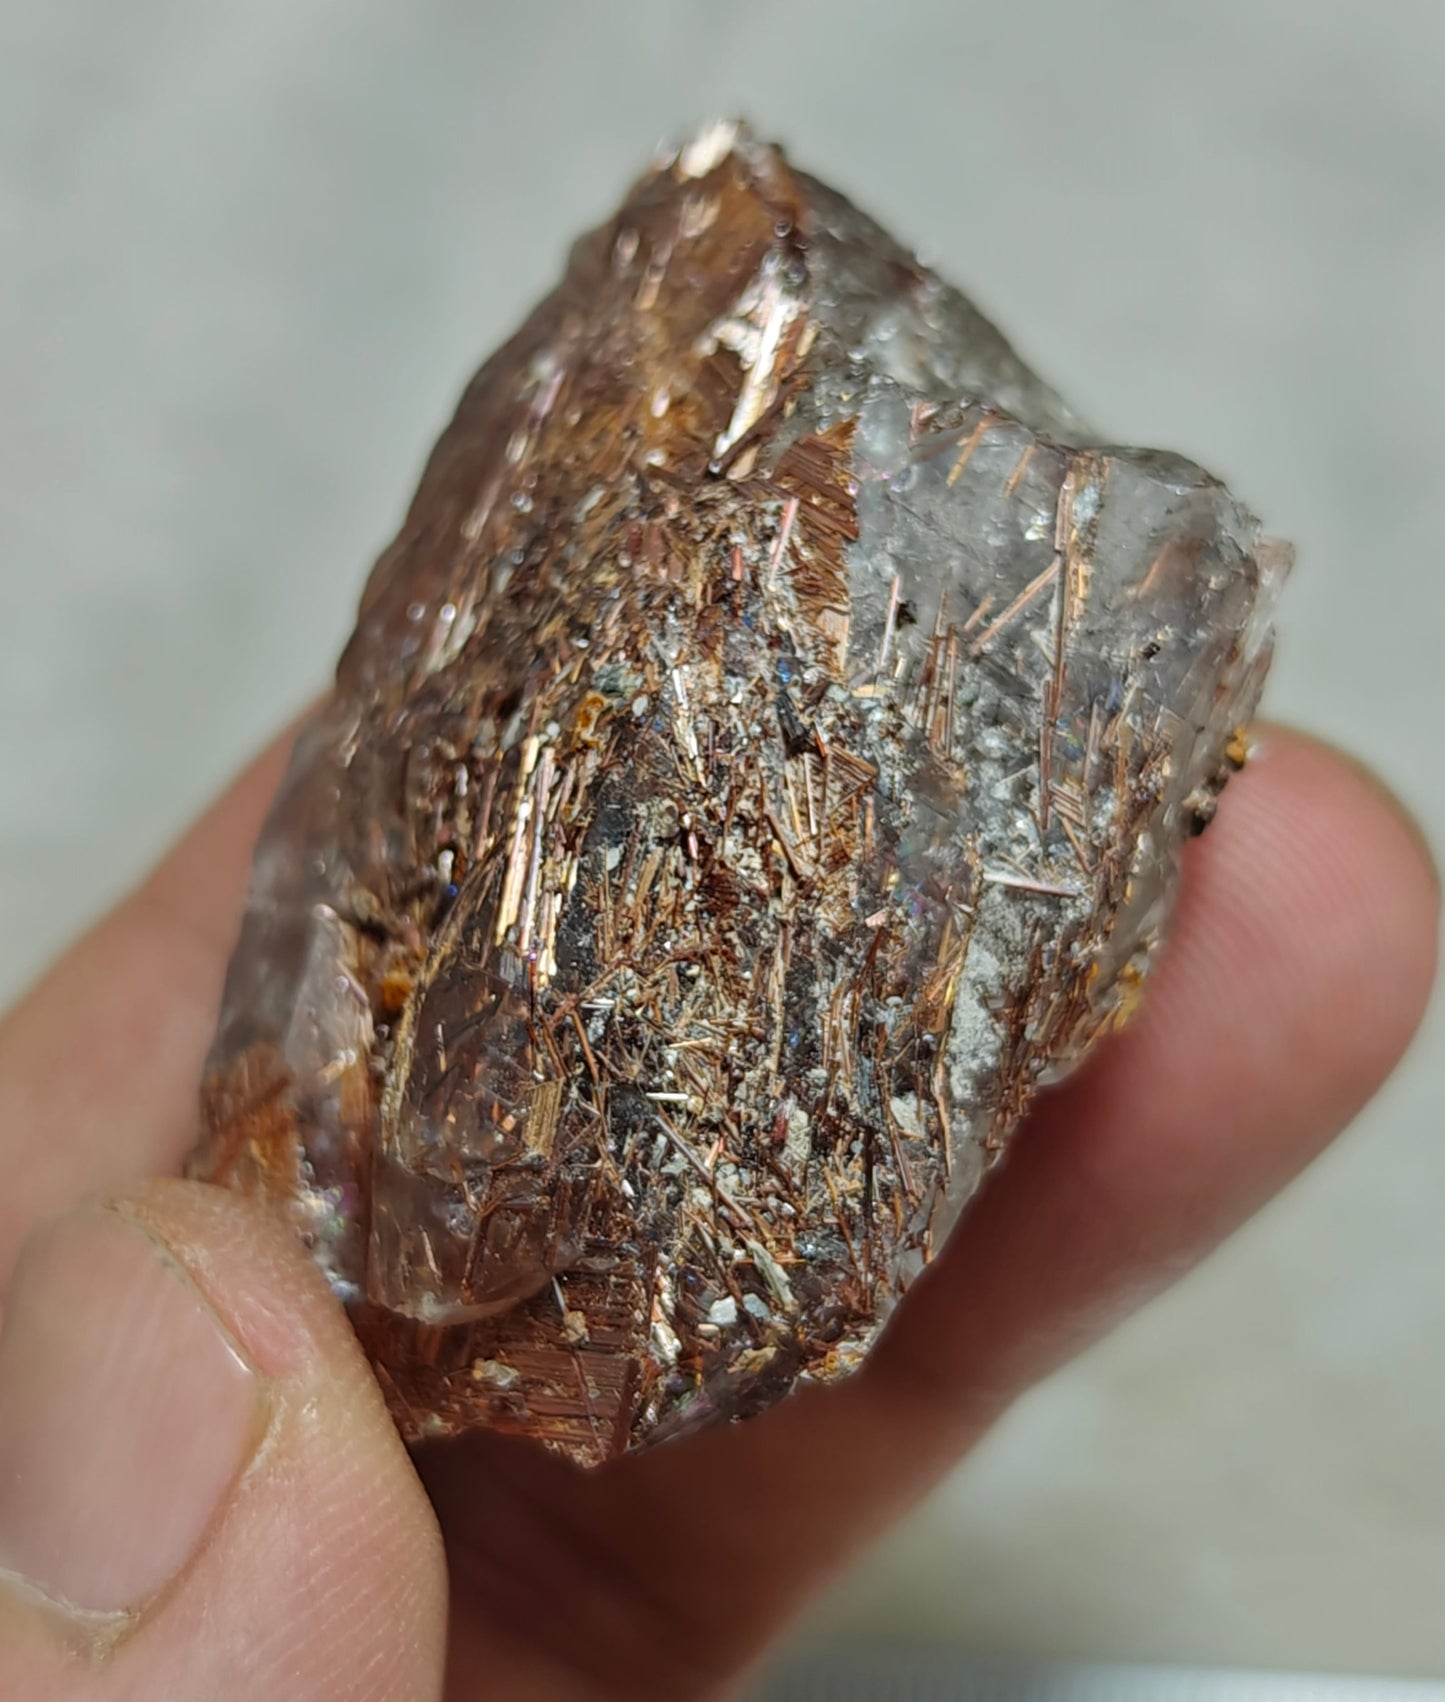 Natural Quartz Crystal with Rutiles Saginite and siderite inclusions 49 grams